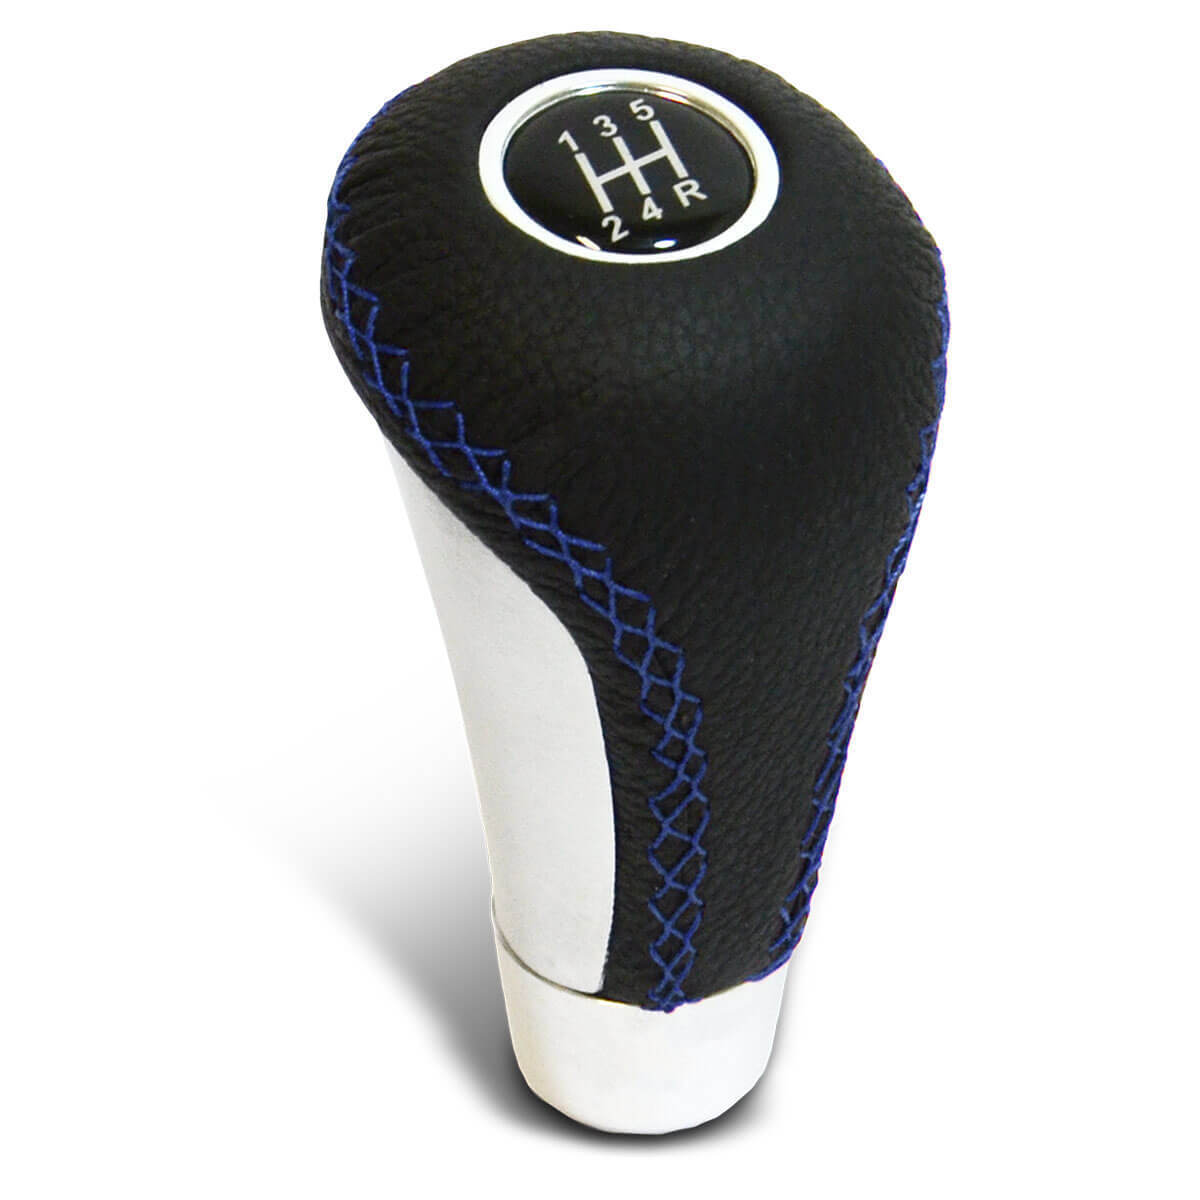 Leather Gear Knob Blue Stitched Aluminium Insert With 8 Shift Patterns